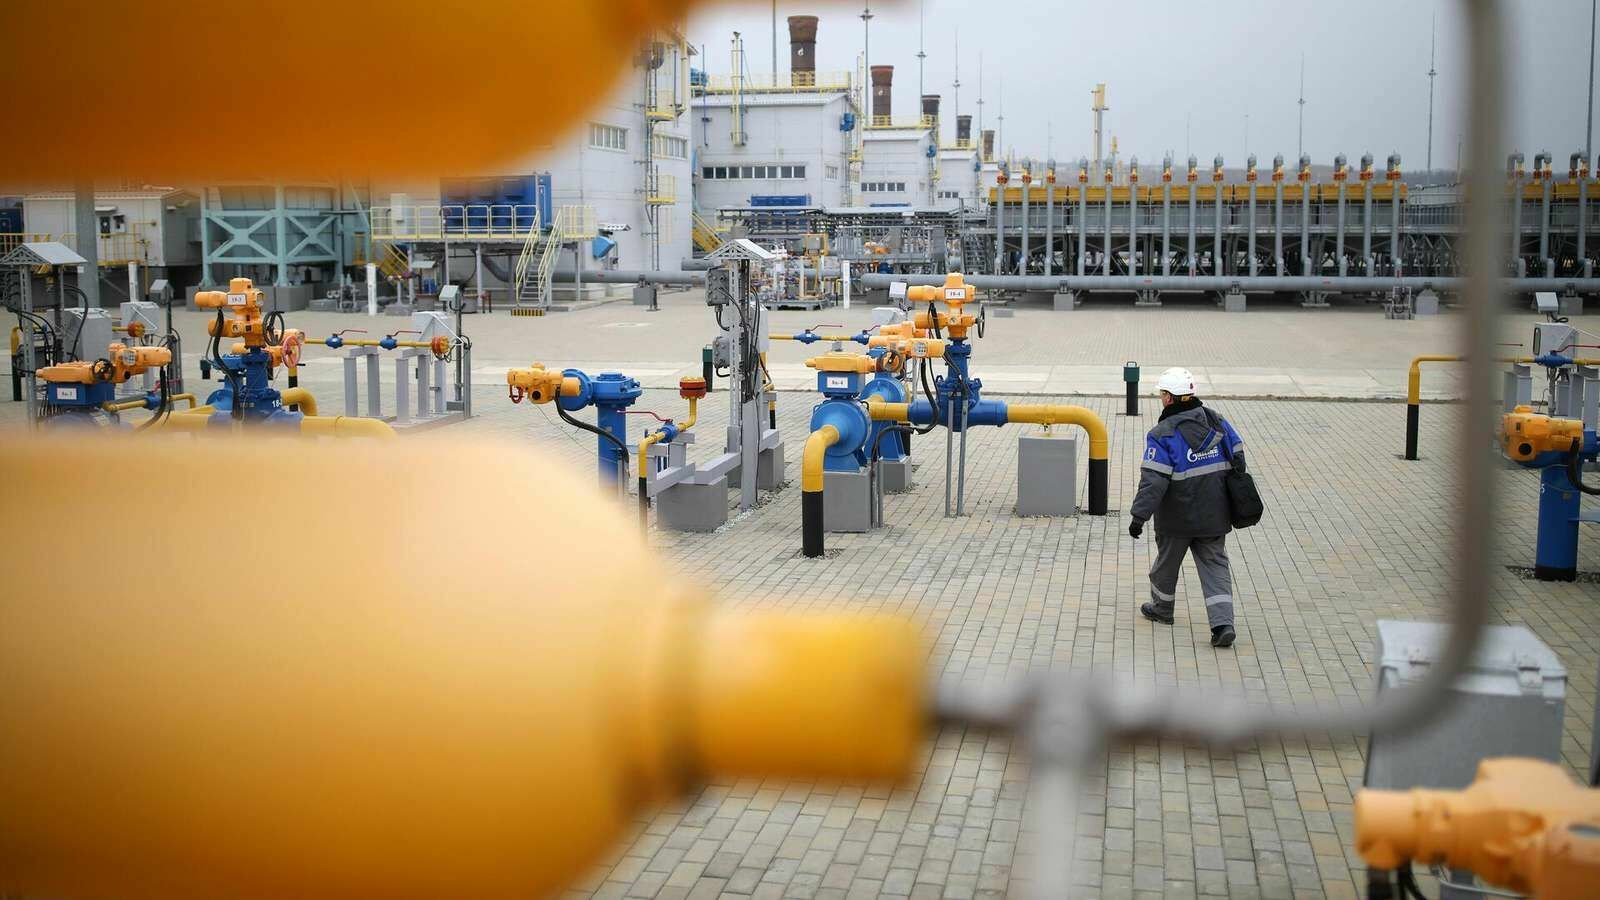 Austria and Germany agreed to pay for Russian gas in a new way